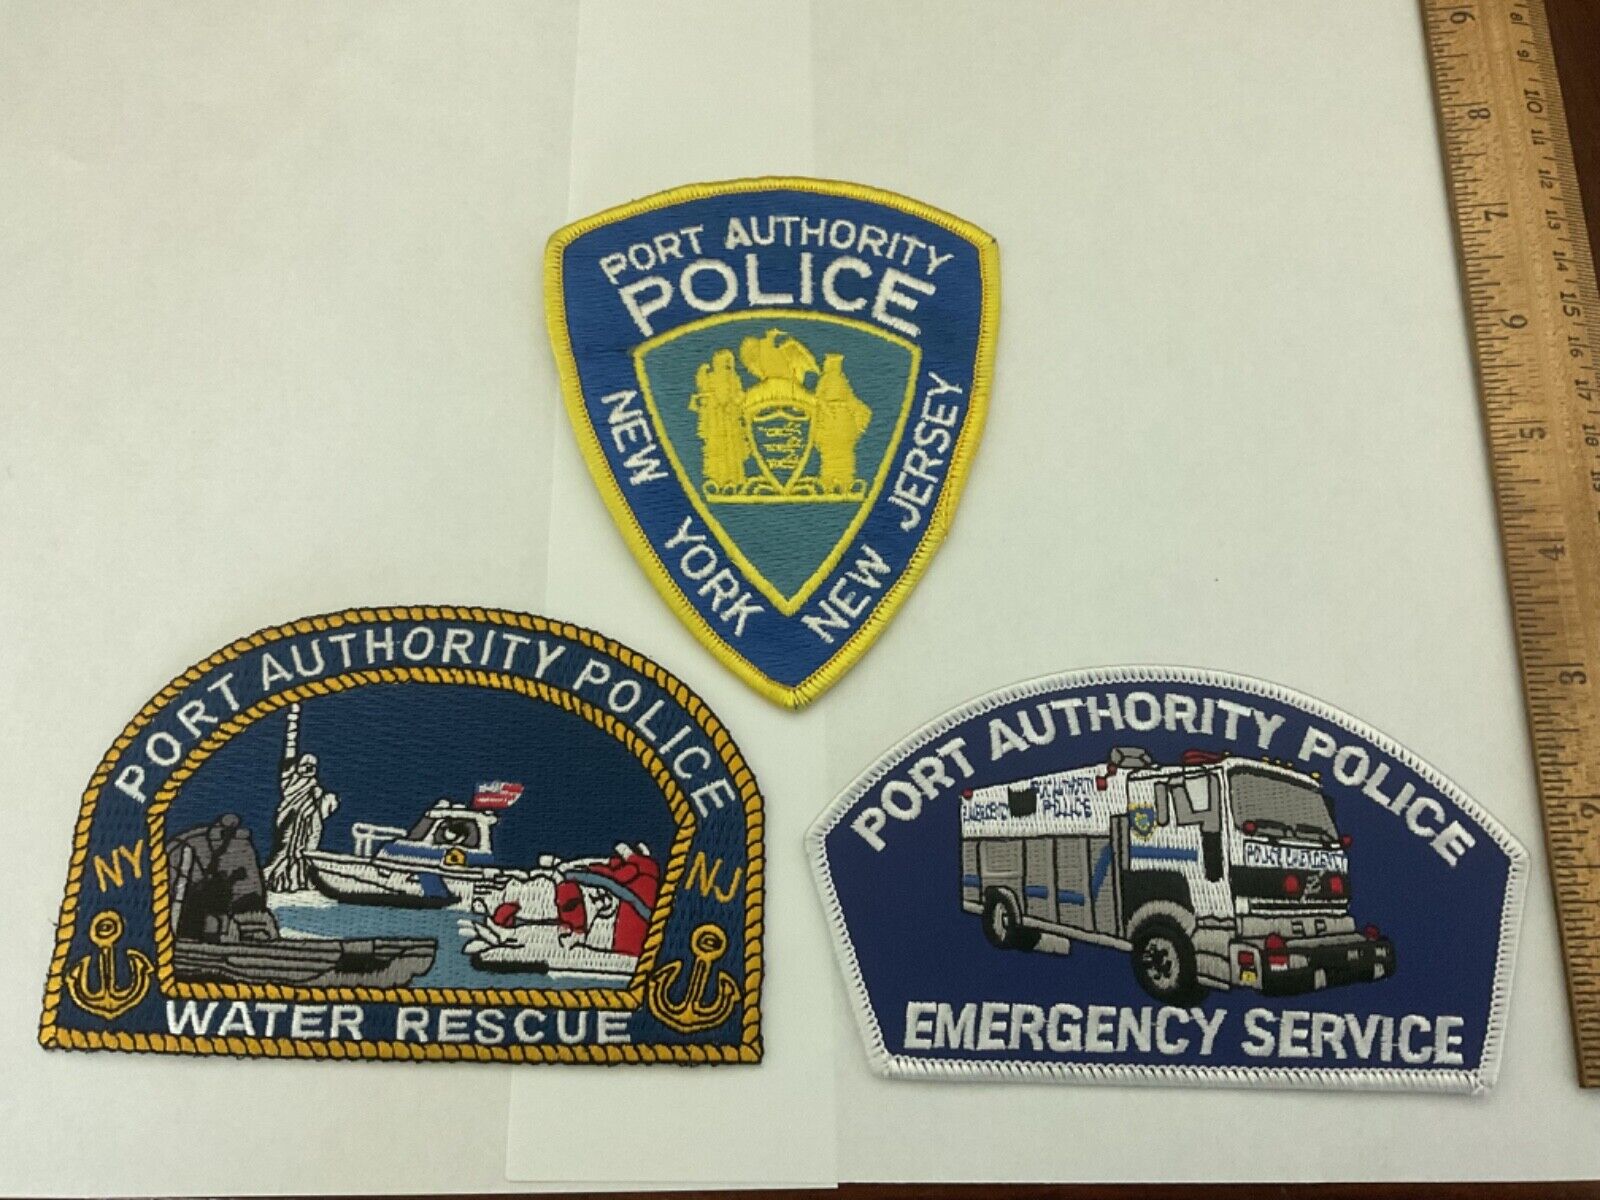 Port Authority Police collectable patch set 3 pieces, one is vintage.